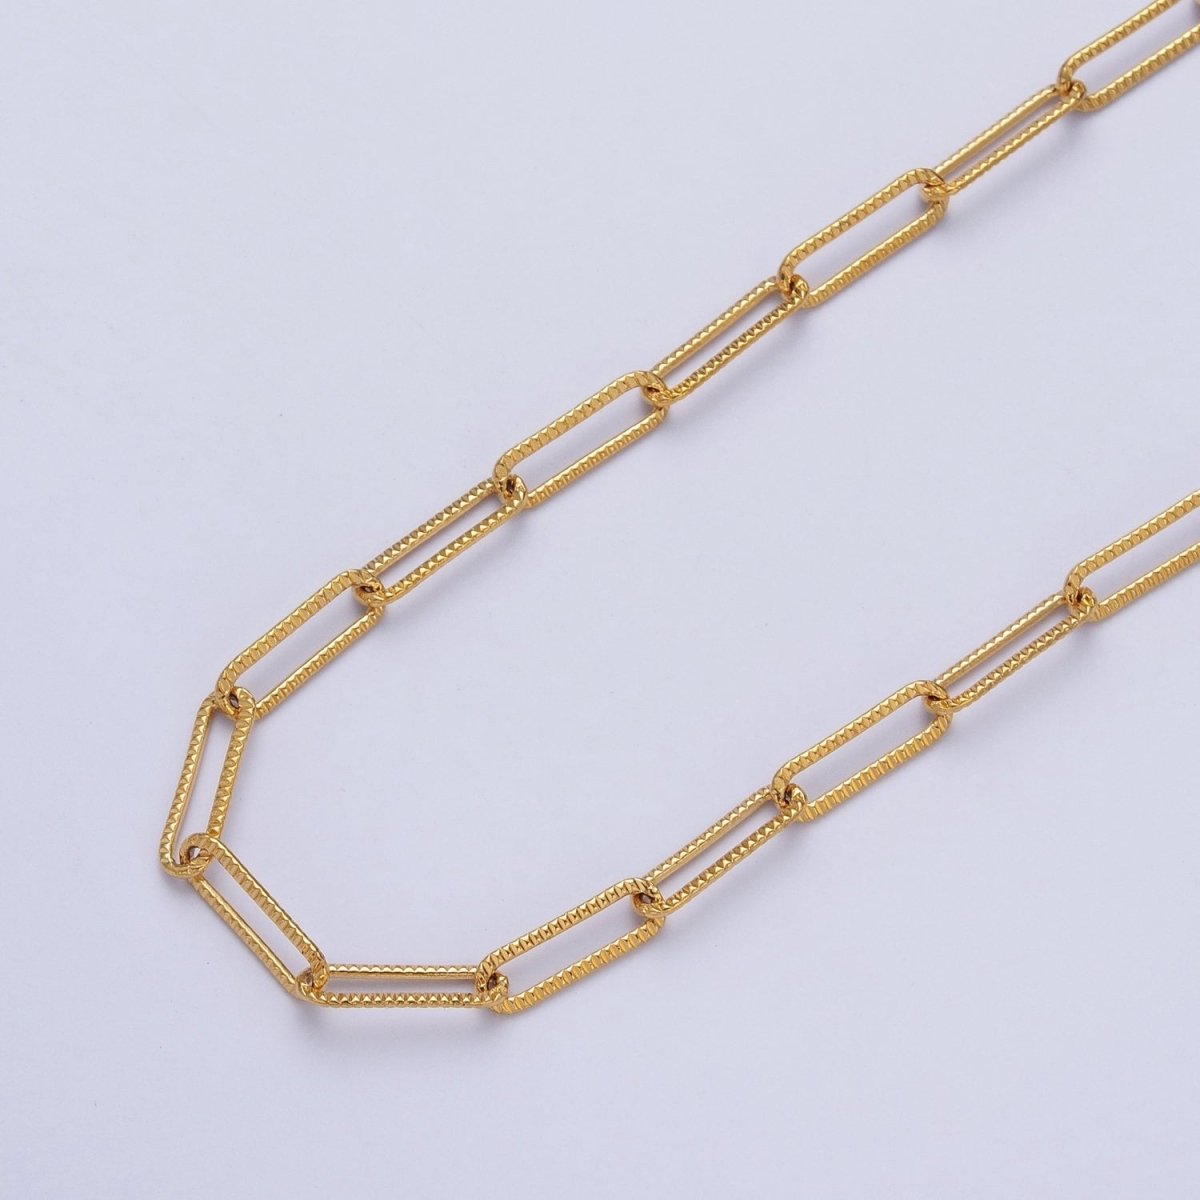 24K Gold Filled Textured Unique Paperclip Chain by Yard For Wholesale Supply in Gold & Silver | ROLL-844 ROLL-845 Clearance Pricing - DLUXCA